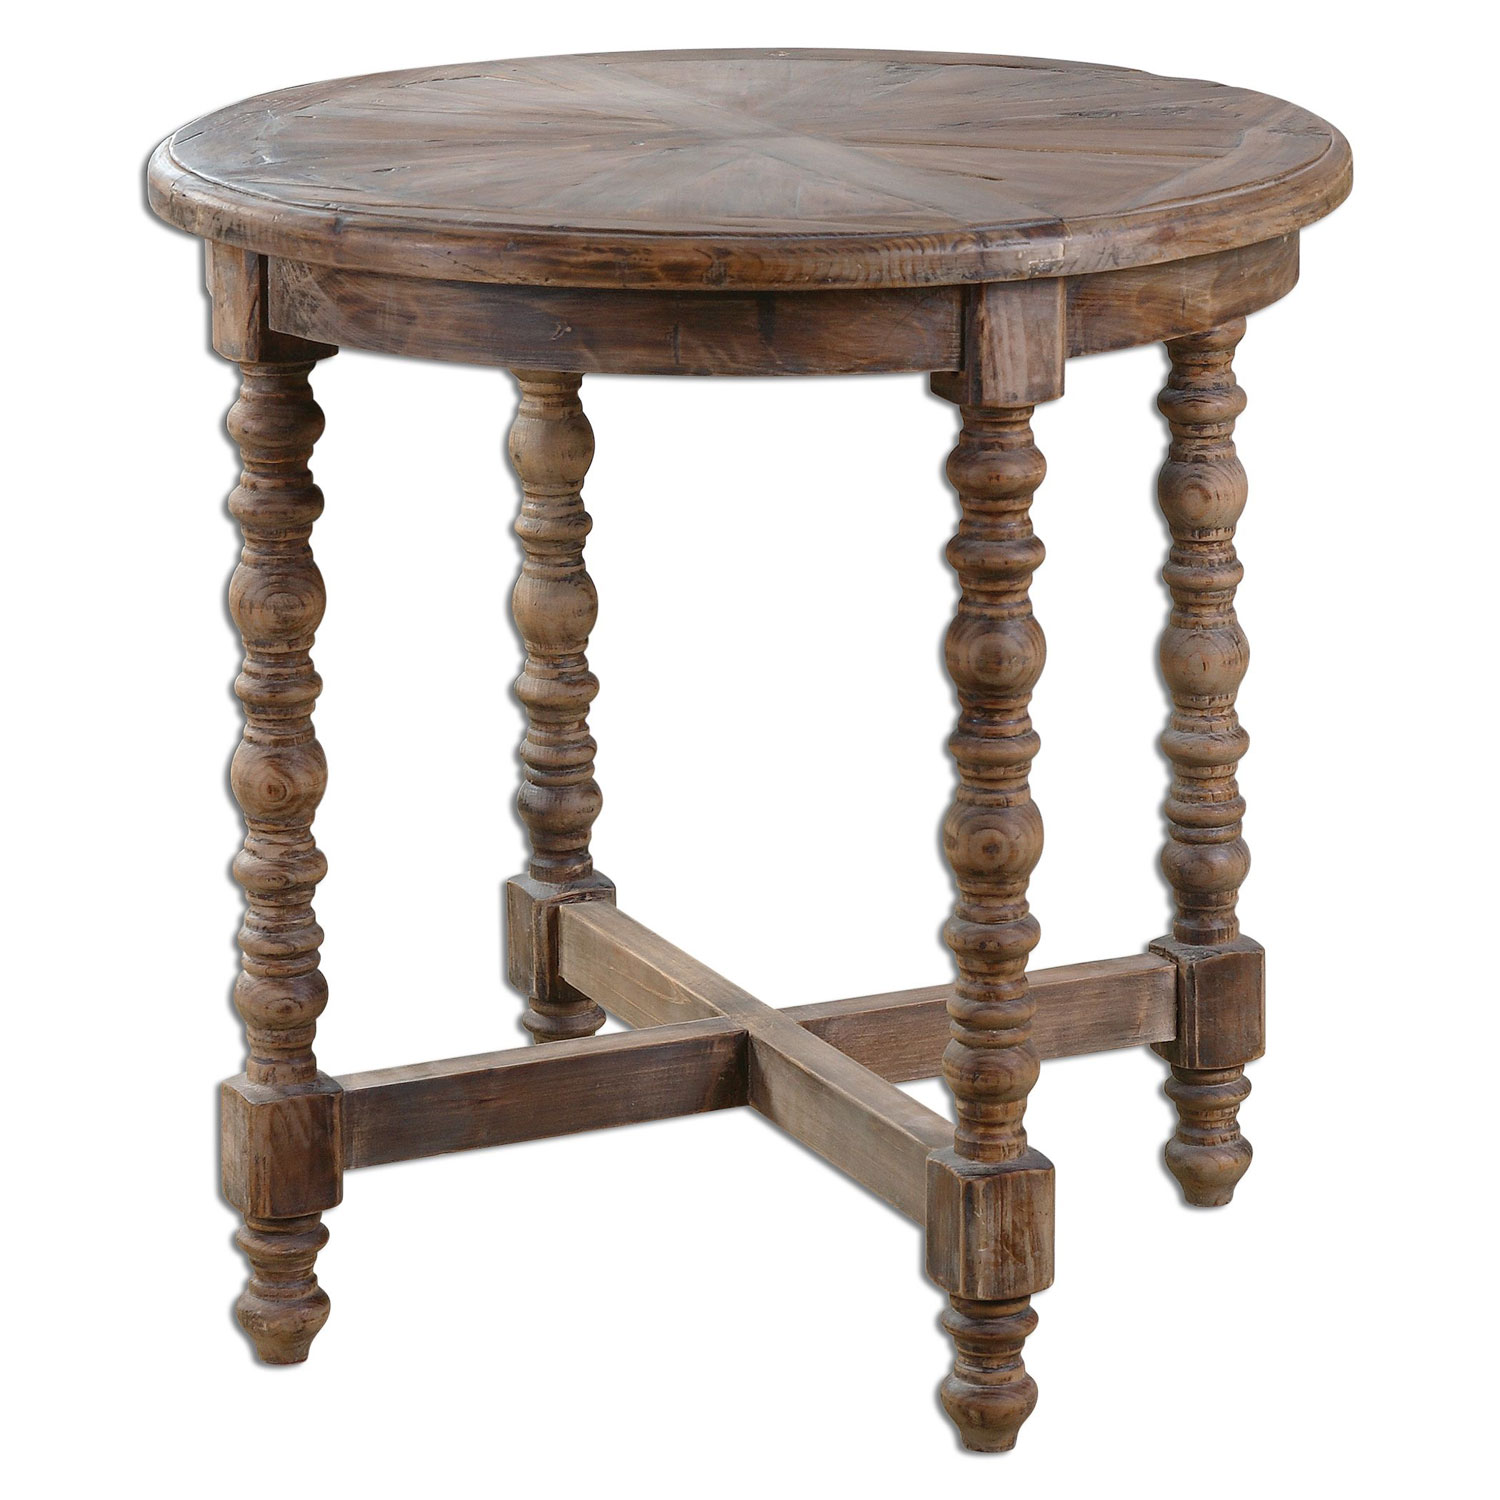 small glass accent table the terrific inch high end round foyer trgn hover zoom uttermost samuelle reclaimed fir wood sal awesome contemporary entrancefoyer burnh kohl mobile app